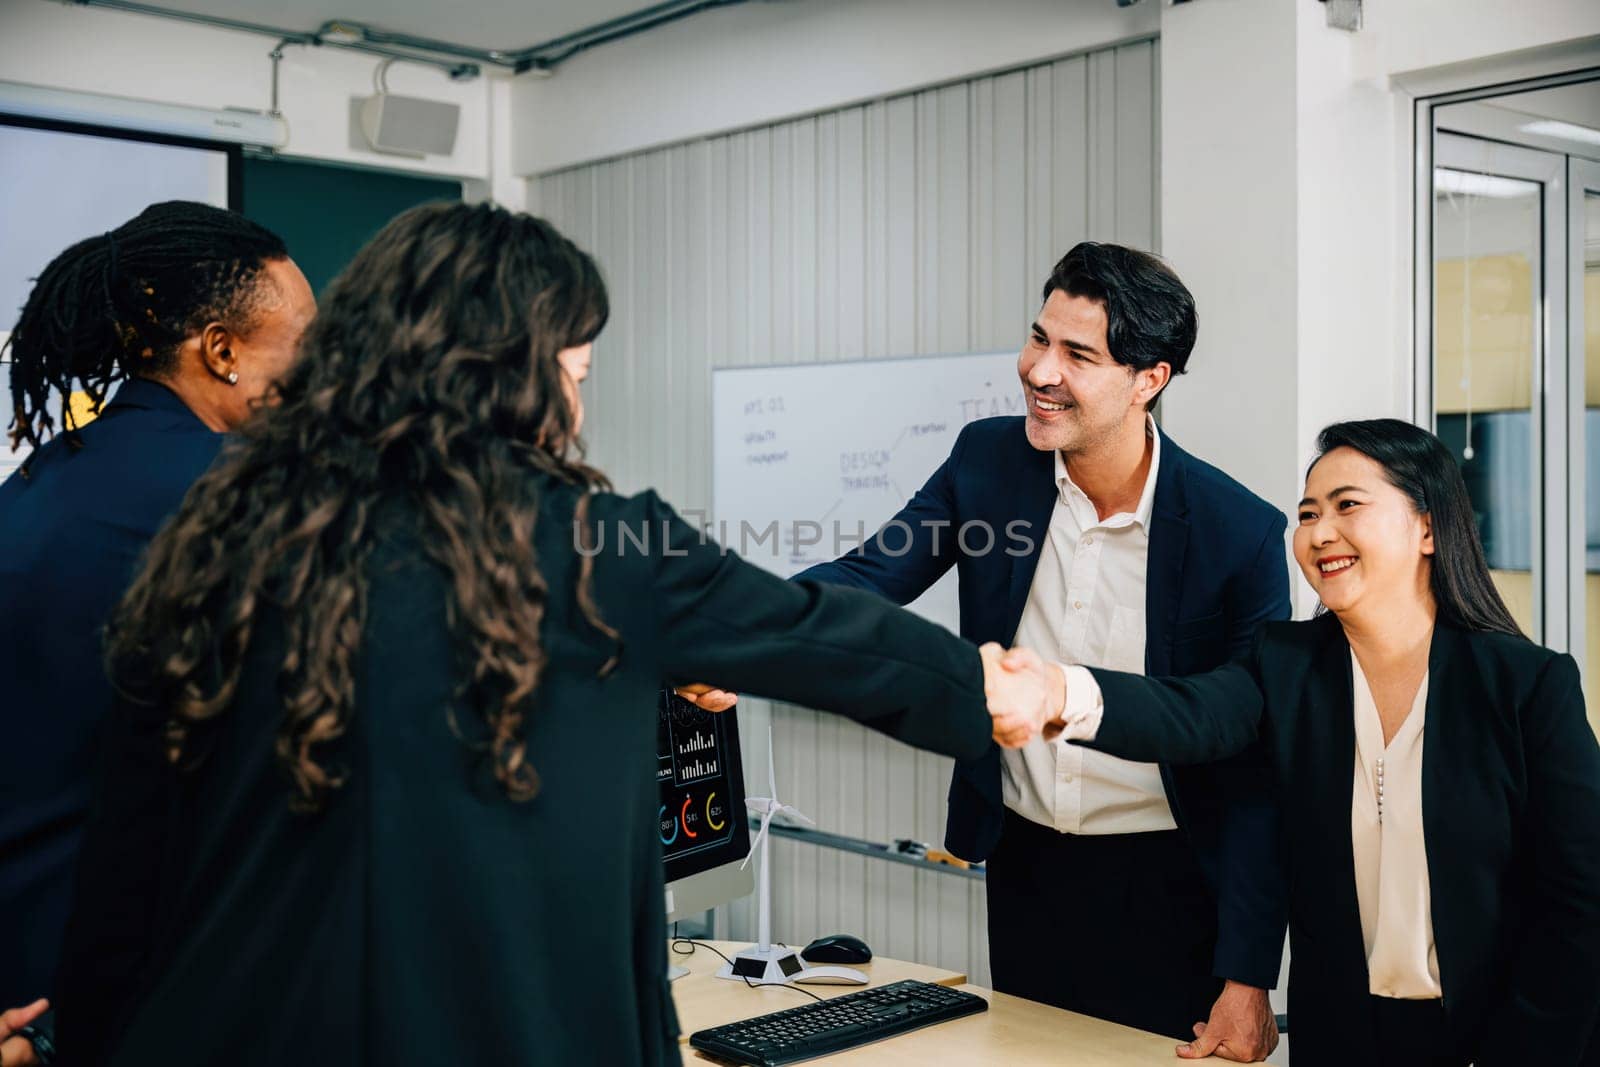 In a meeting, business people shake hands in an office, signifying their successful partnership. Colleagues, including managers, lawyers, and executives, celebrate their achievement. Teamwork